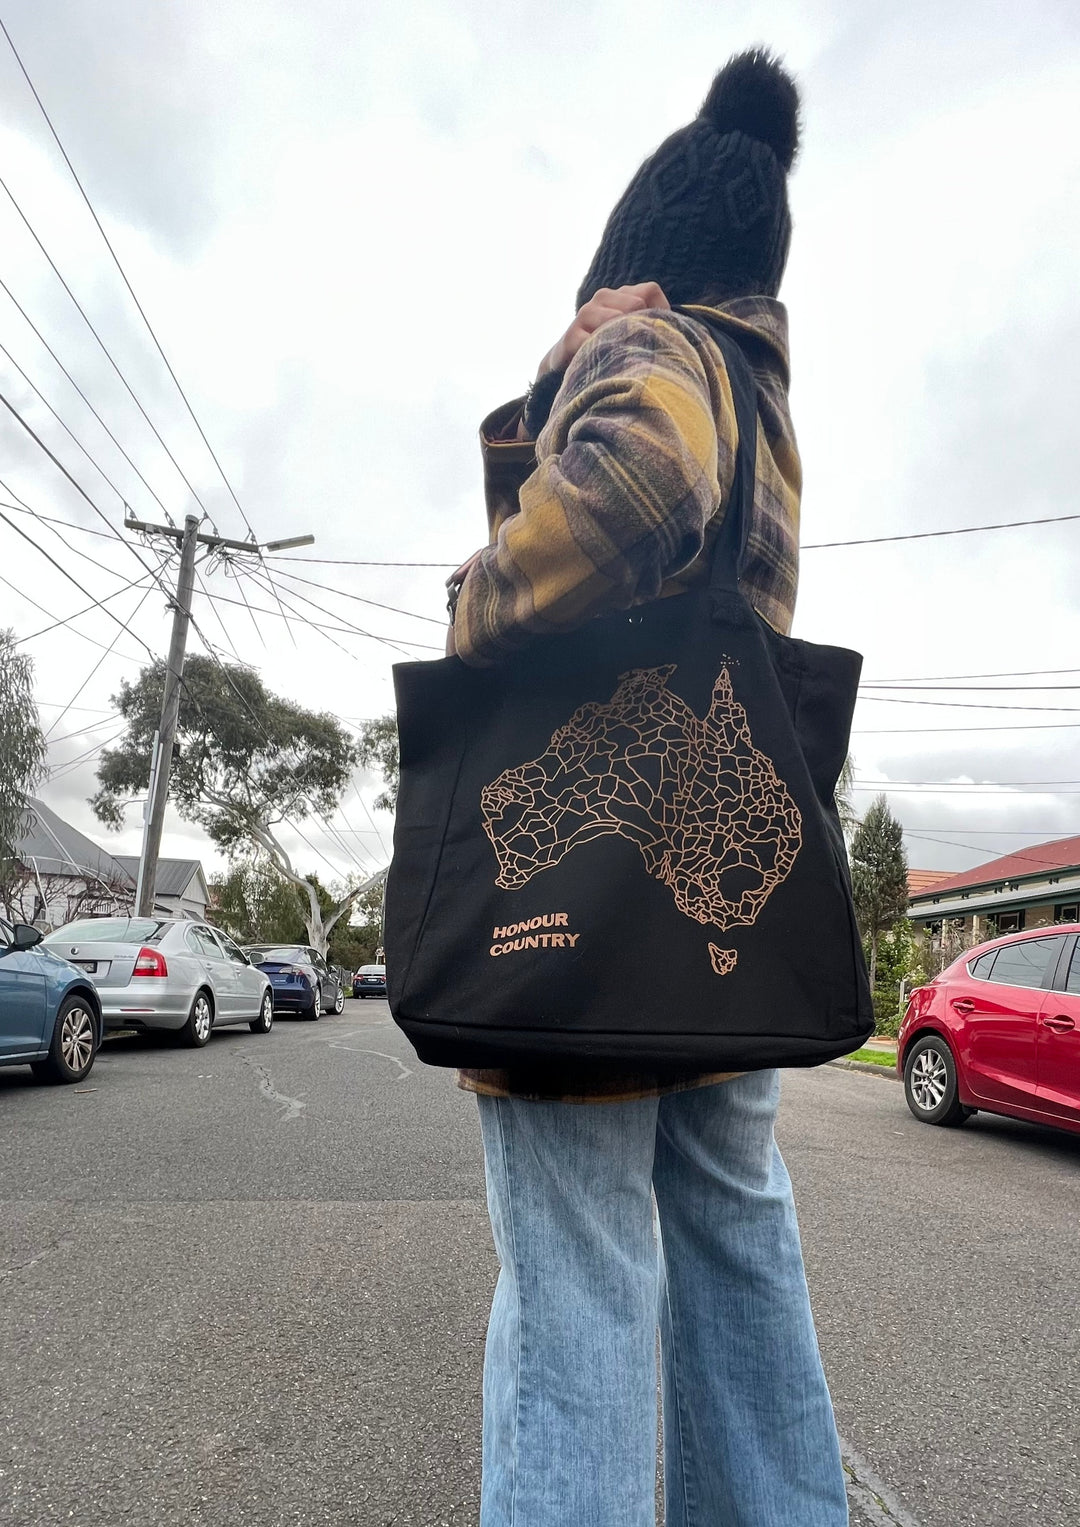 Clothing The Gaps. Decolonise Everyday Bag. Black Tote bag with 2 over the shoulder straps, laptop compartment and small pocket for loose items such as keys inside bag. On outside of bag is a brown screen print featuring the words 'Honour Country' and a large decolonized map of Australia showing all 260 First Nations groups. 